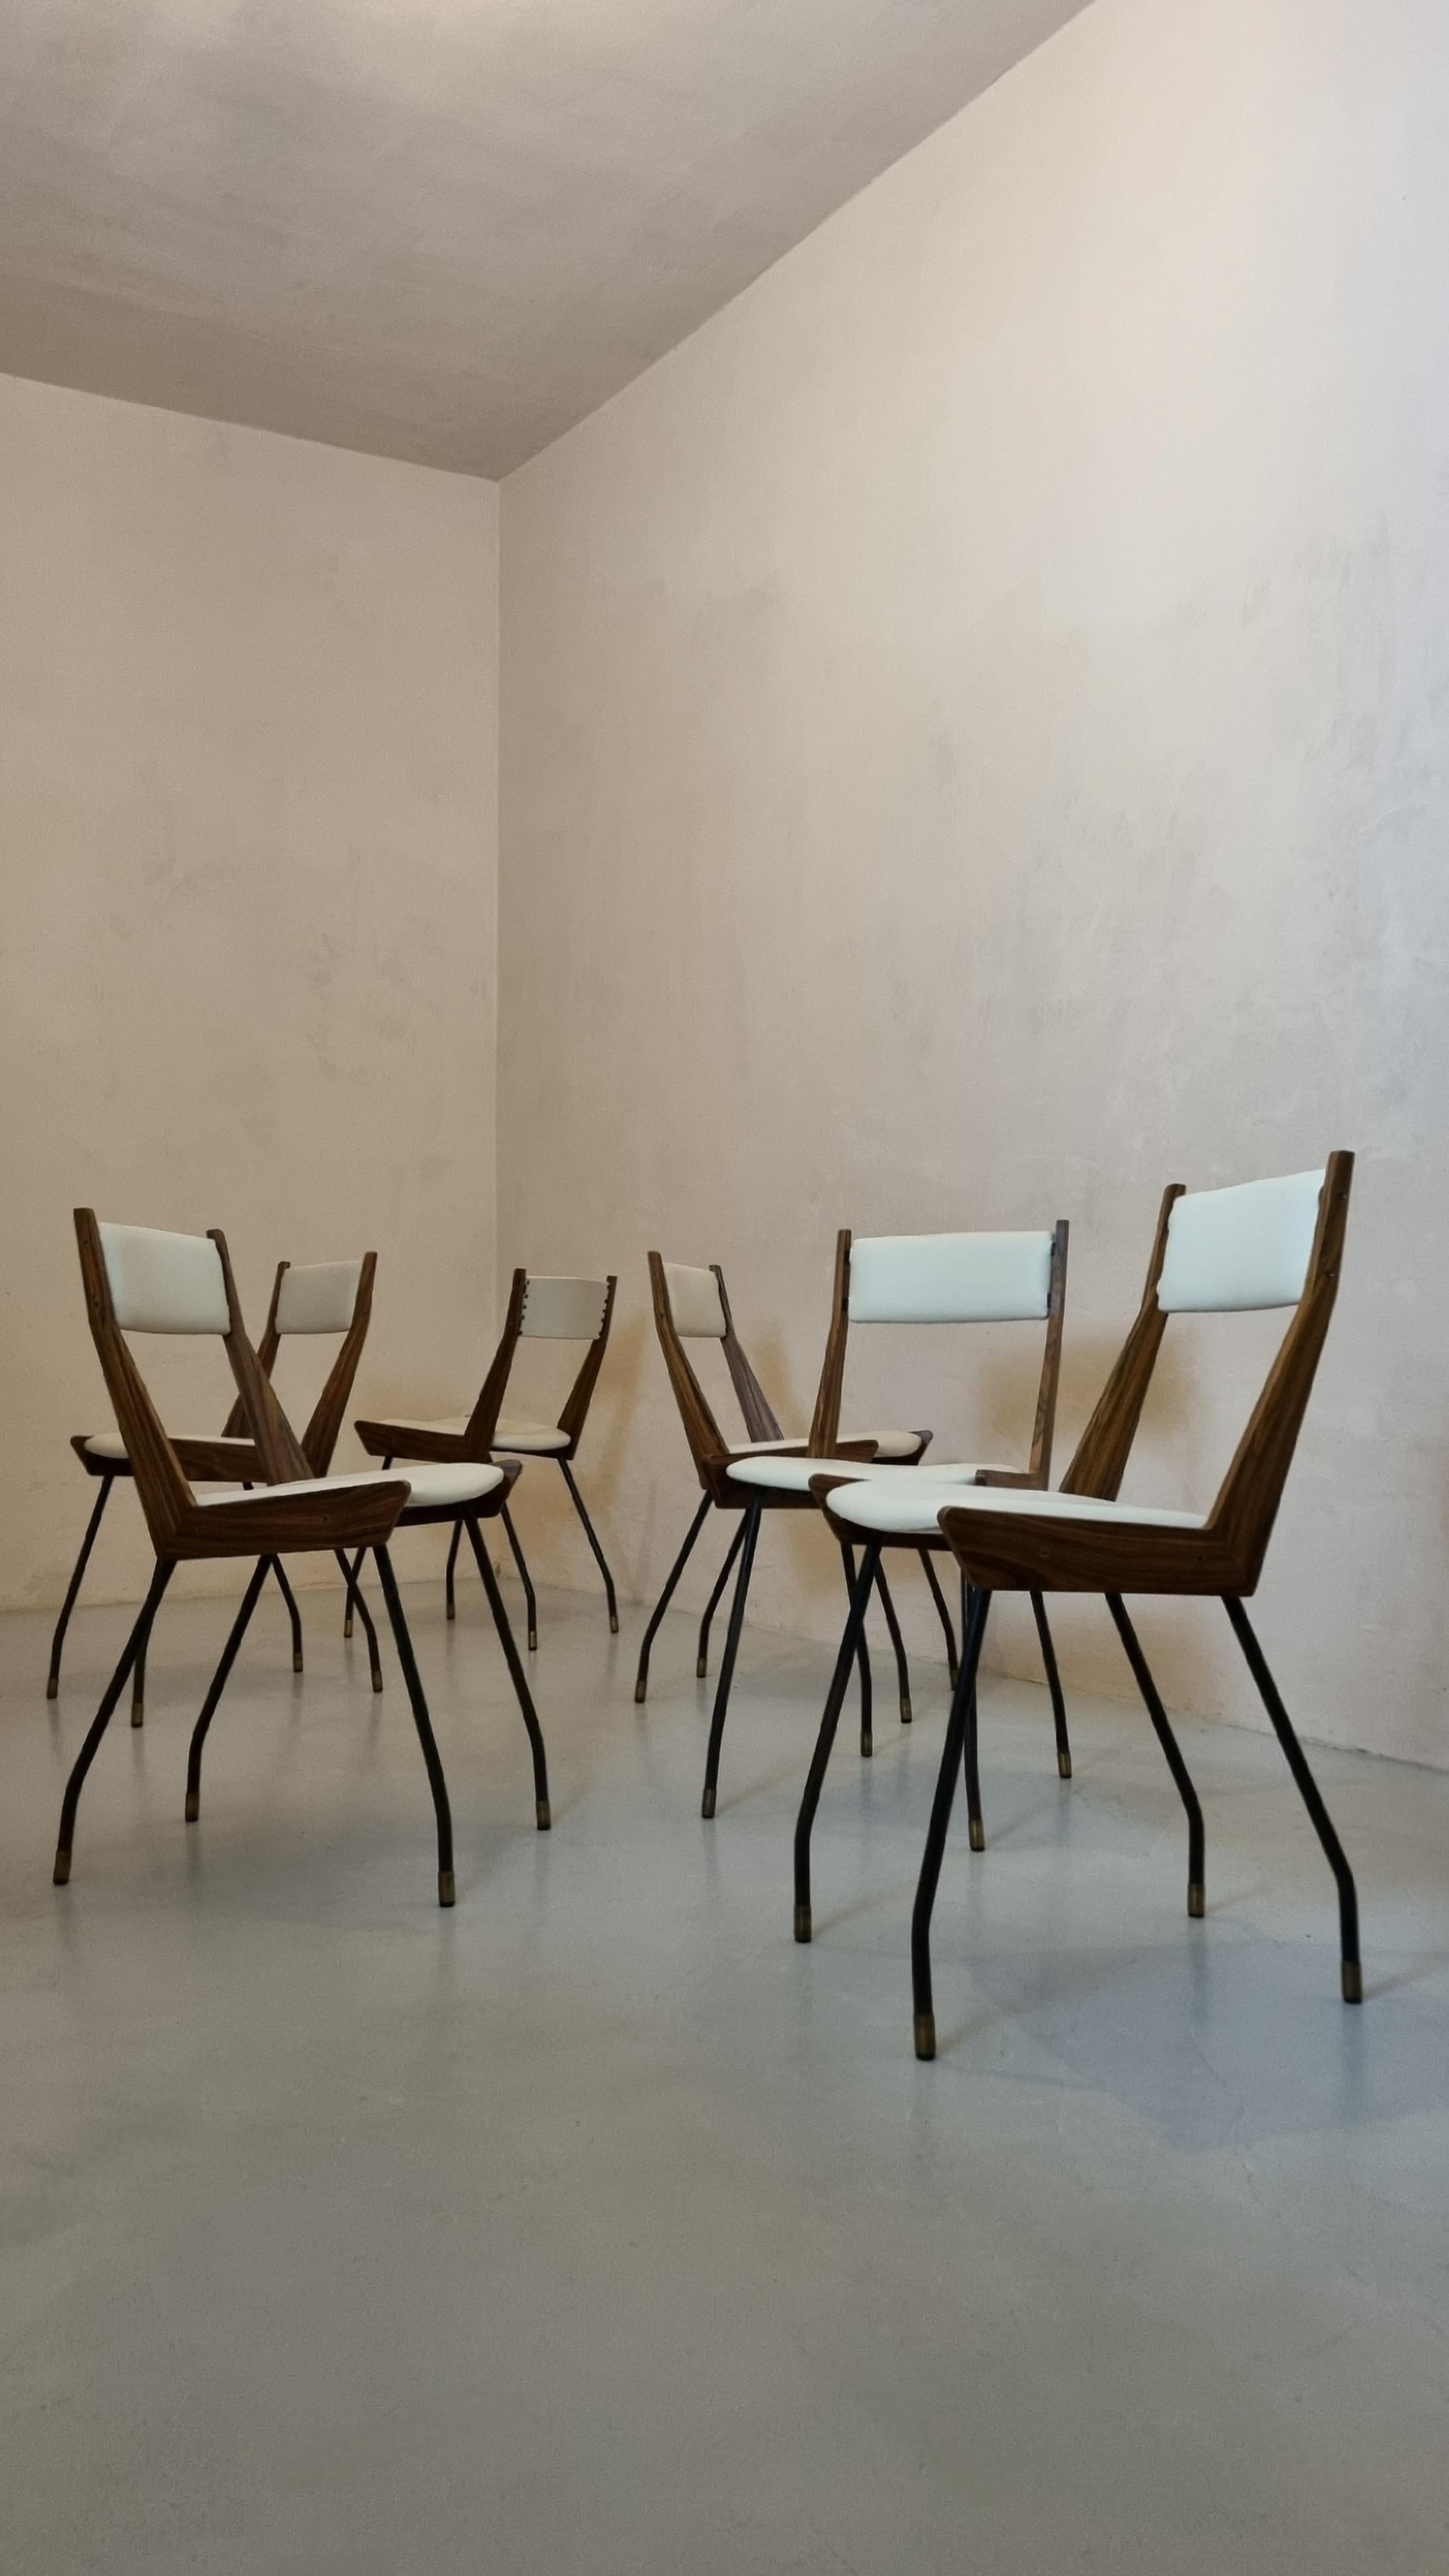 Set of 6 chairs designed by Carlo Ratti in the 1950s for Industria Legni Curvati.
Iron frame, brass feet, wood veneer, leather seats. 
The chairs have been restored respecting the original details, leather reupholstered seats, wooden armrests with